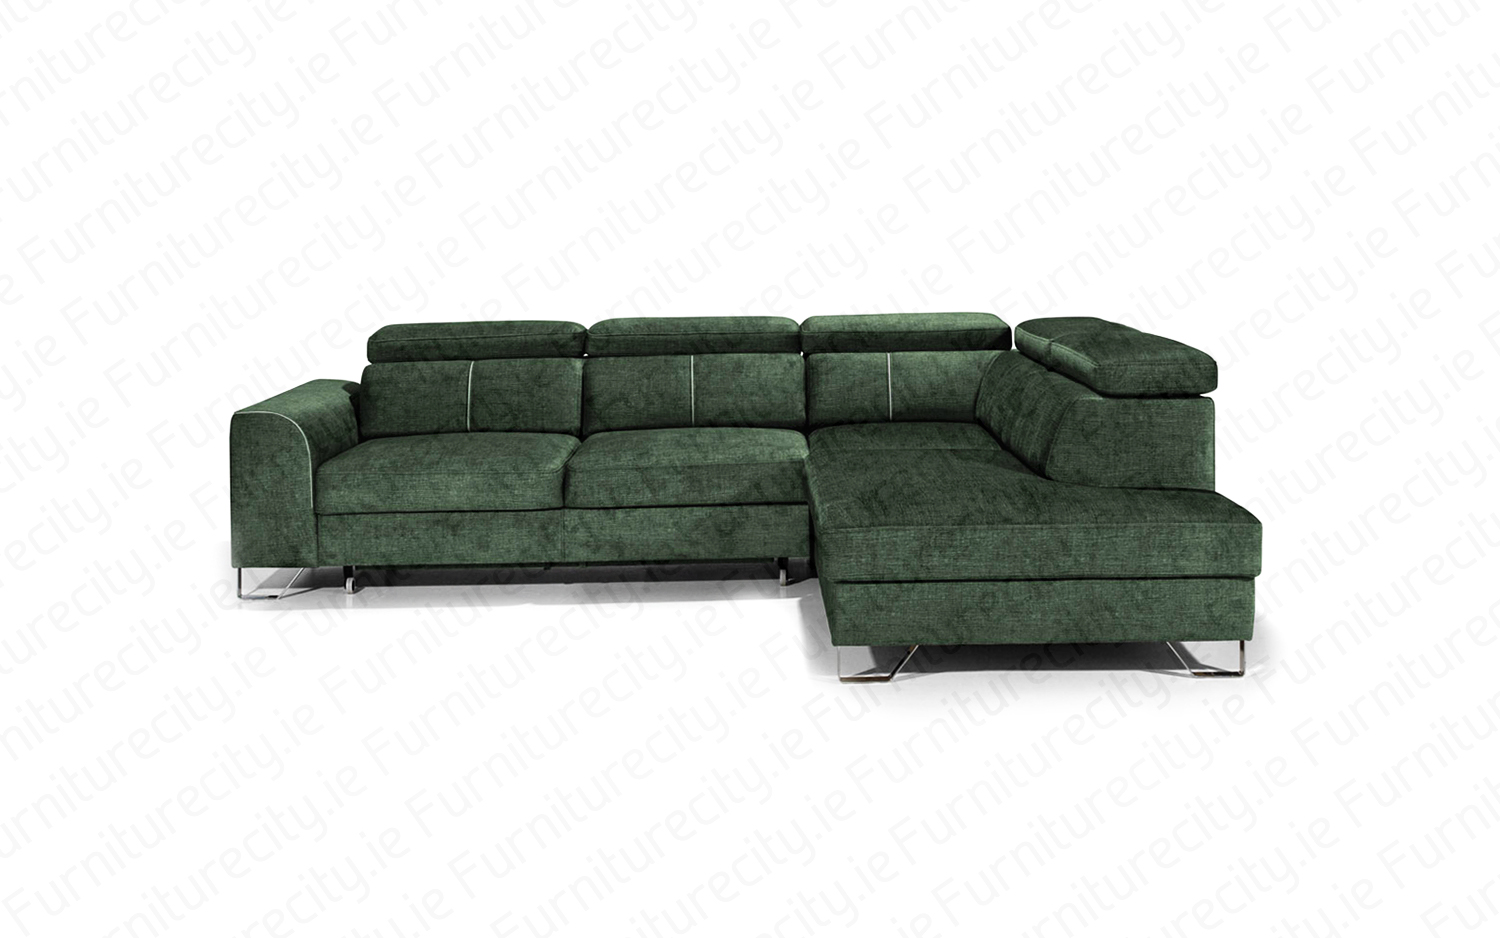 Sofa bed ASTRA Open by Furniturecity.ie